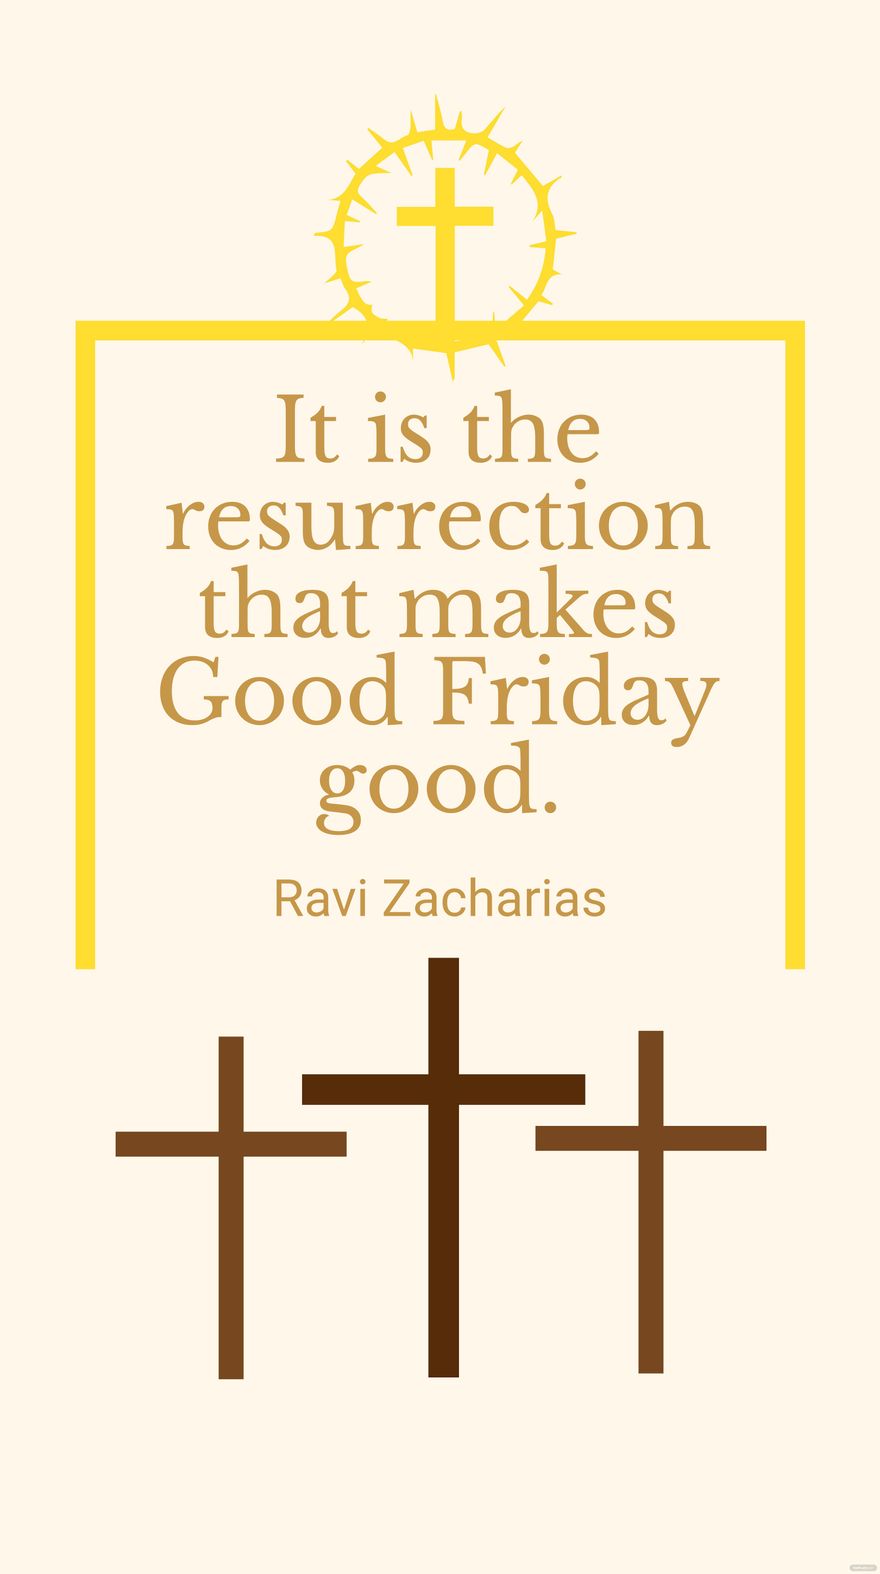 Free Ravi Zacharias - It is the resurrection that makes Good Friday good. in JPG